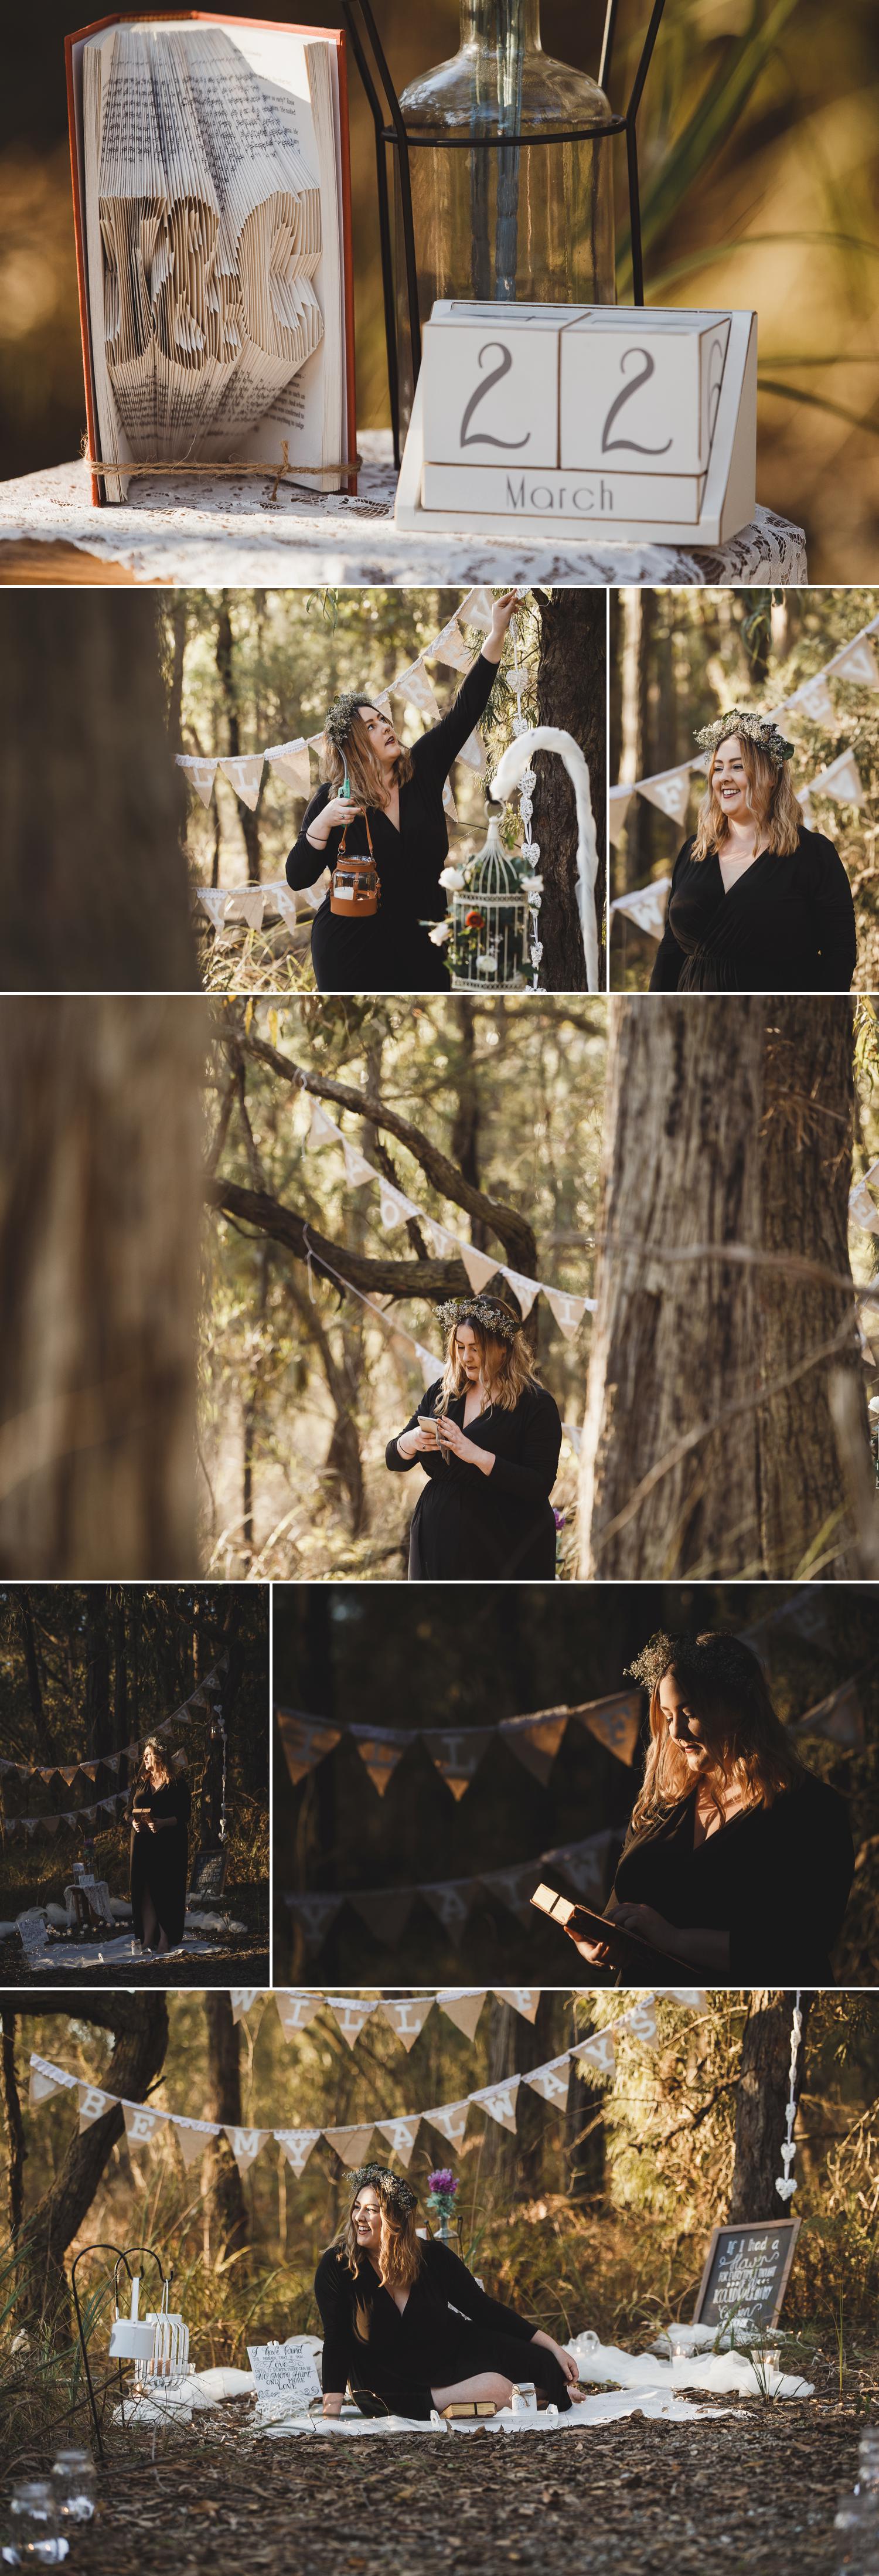 Mt Cannibal Gippsland, Proposal Photo, Forest Photoshoot Engagement, Beautiful Couple Embracing, Flower Crowns Wedding by Danae Studios